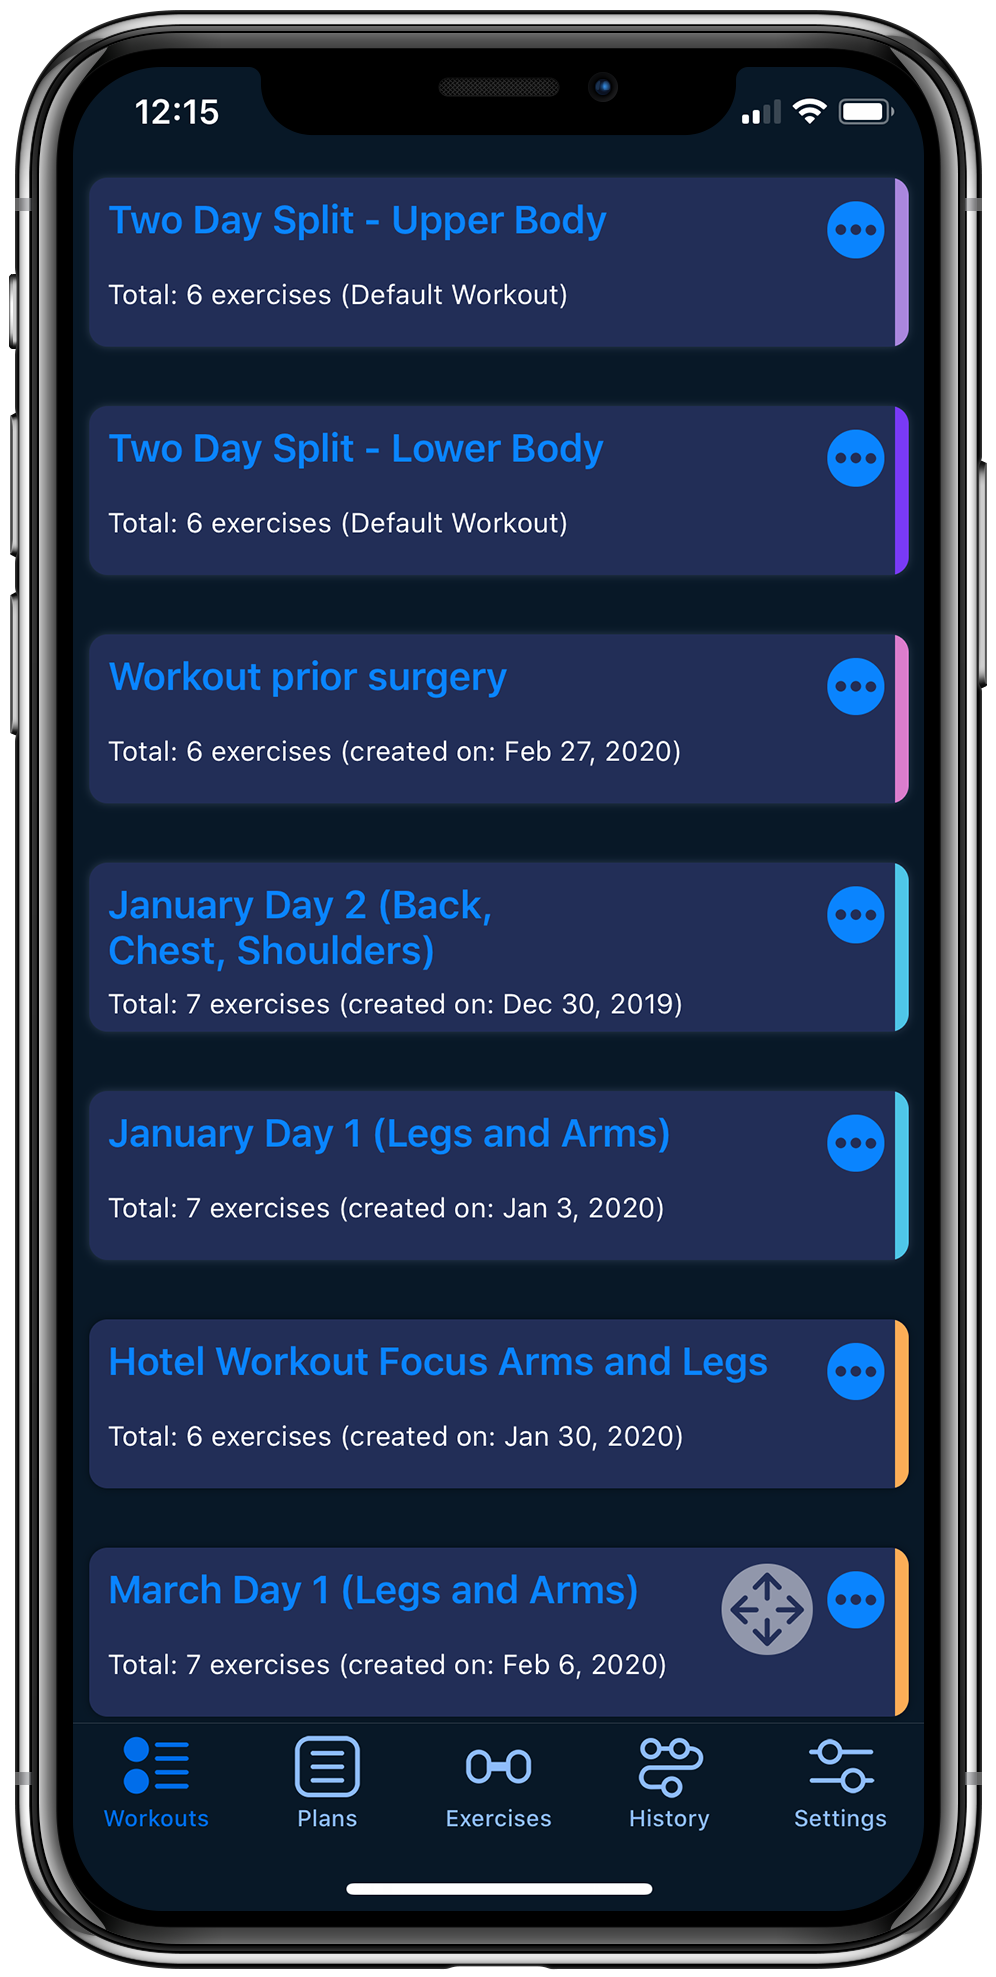 Workout tracker app on iPhone displaying a list of fitness workouts